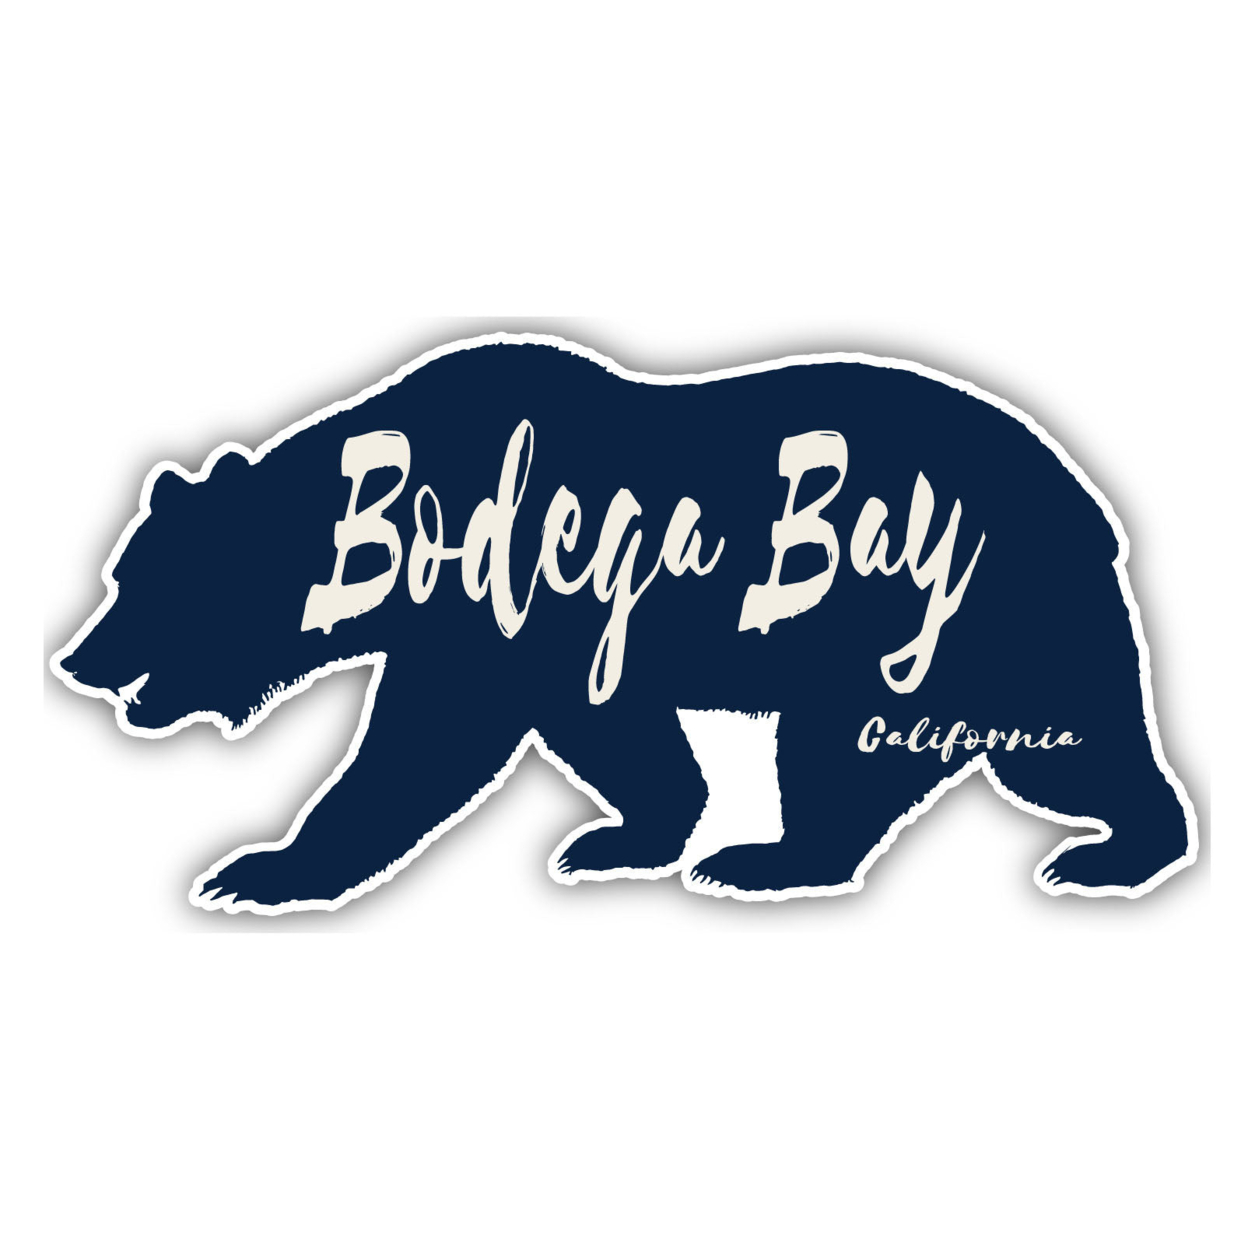 Bodega Bay California Souvenir Decorative Stickers (Choose Theme And Size) - 4-Pack, 12-Inch, Camp Life